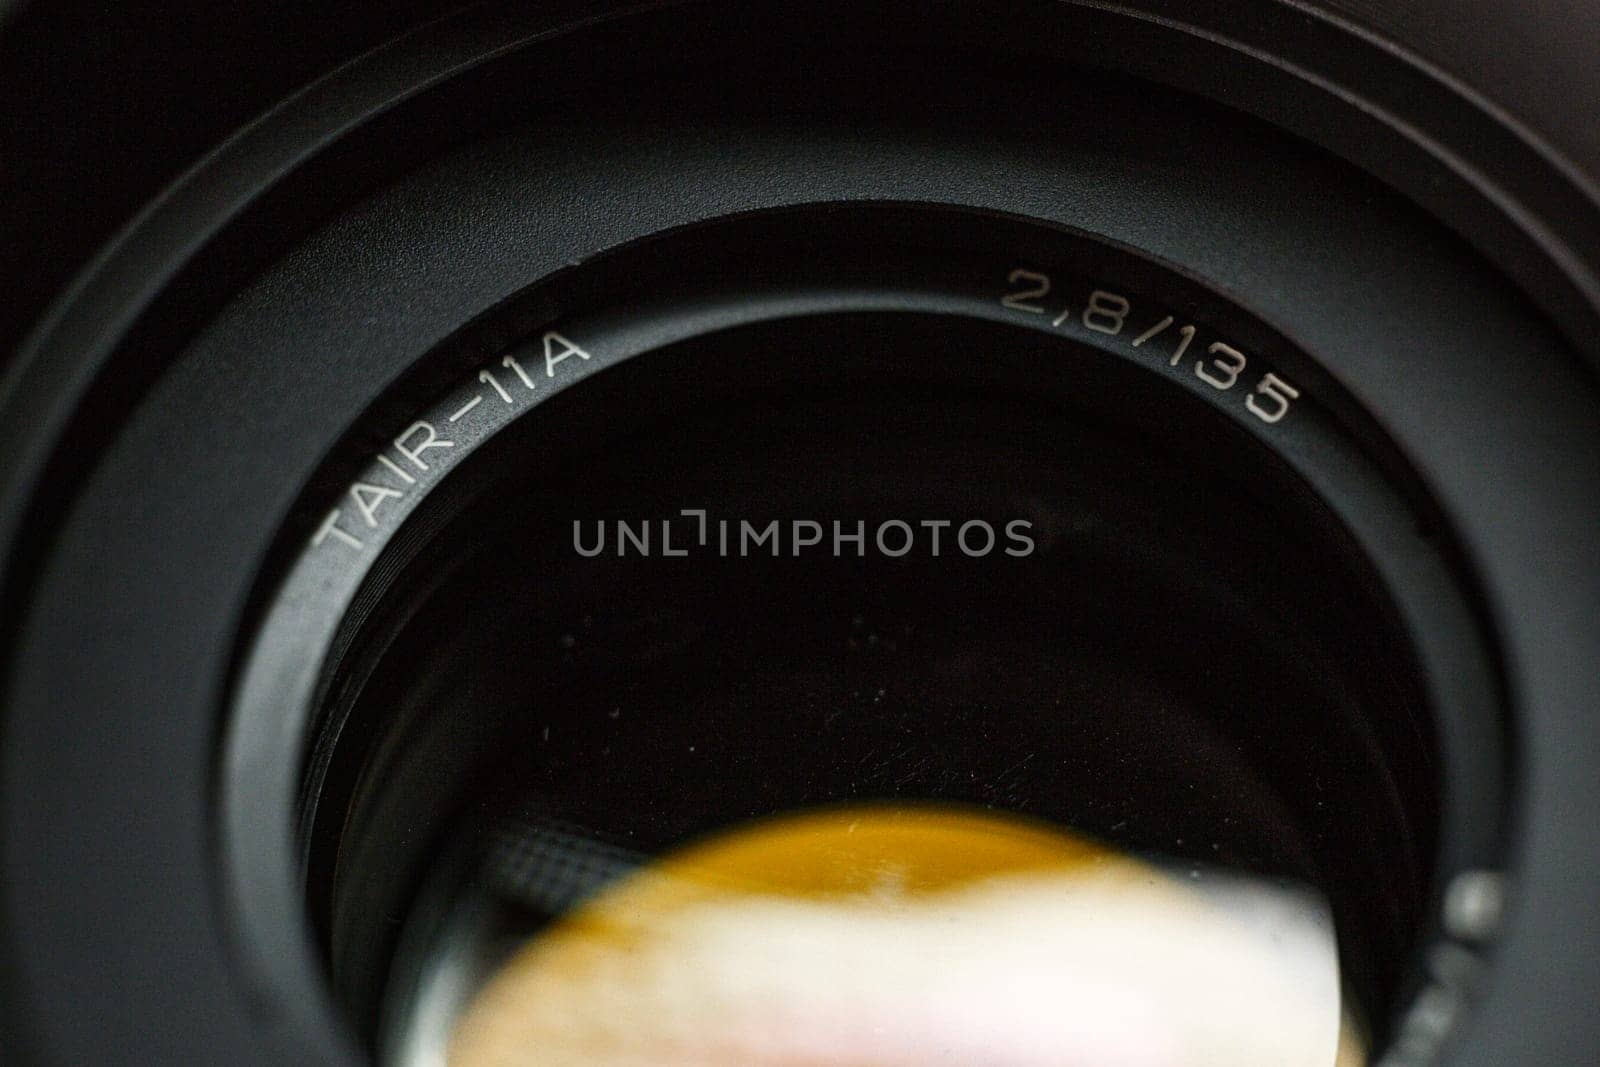 Close-up of TAIR-11A lens engraving, clear 2.8 135 focal ratio marking, photography equipment detail, dark soft-focus background by mosfet_ua